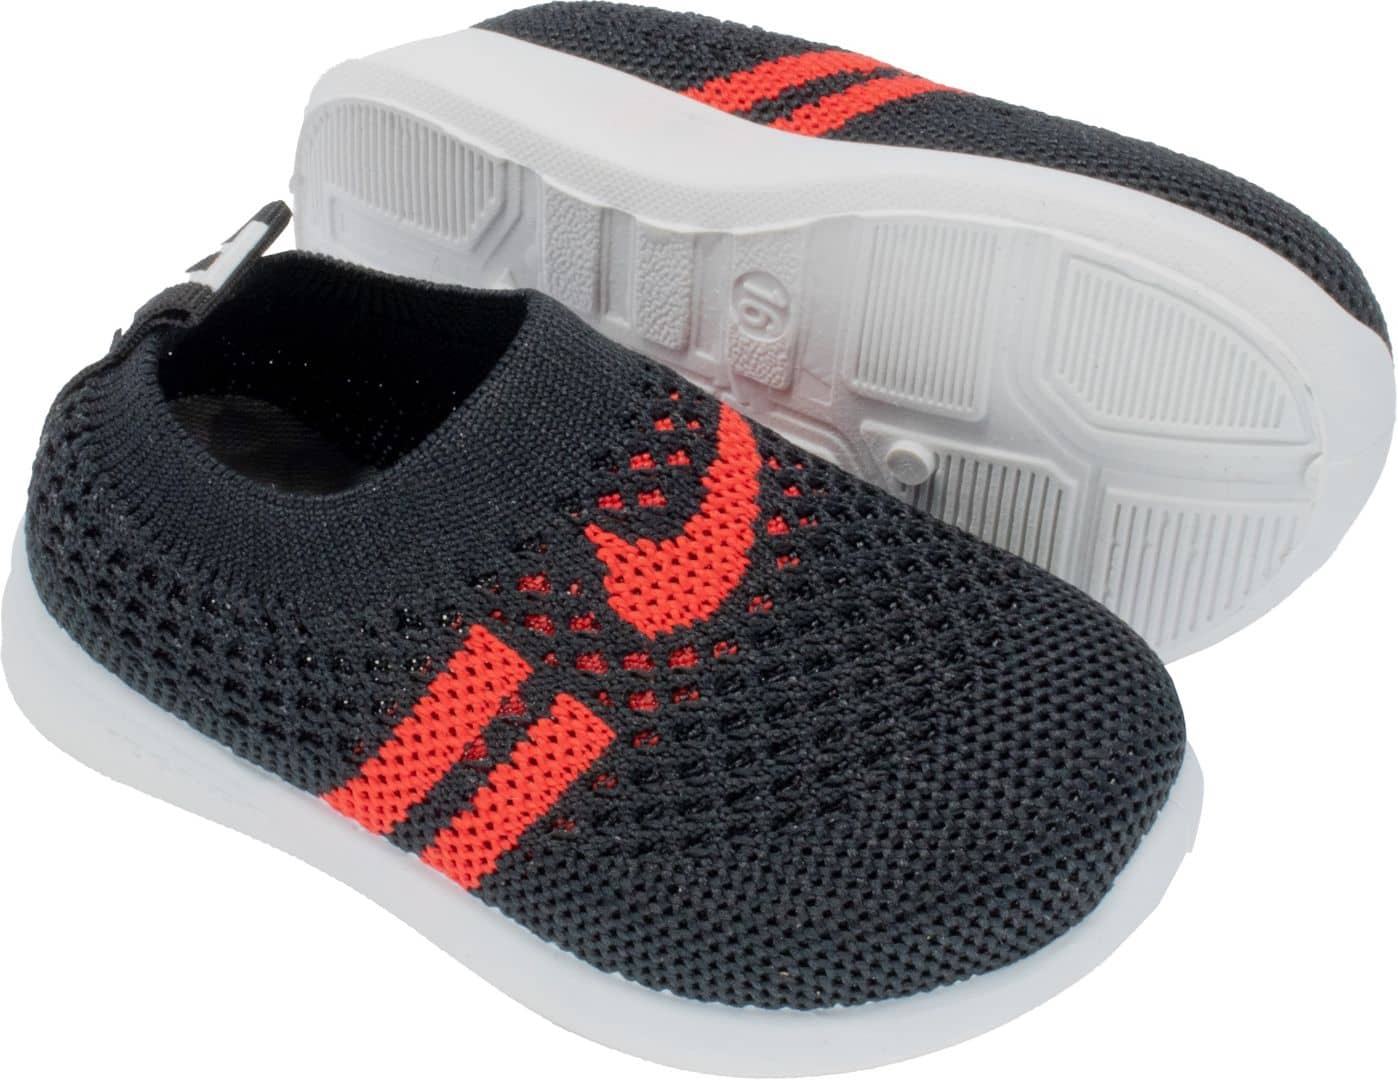 Children Sneakers 823-162 (Black/Red - Size 16-20)